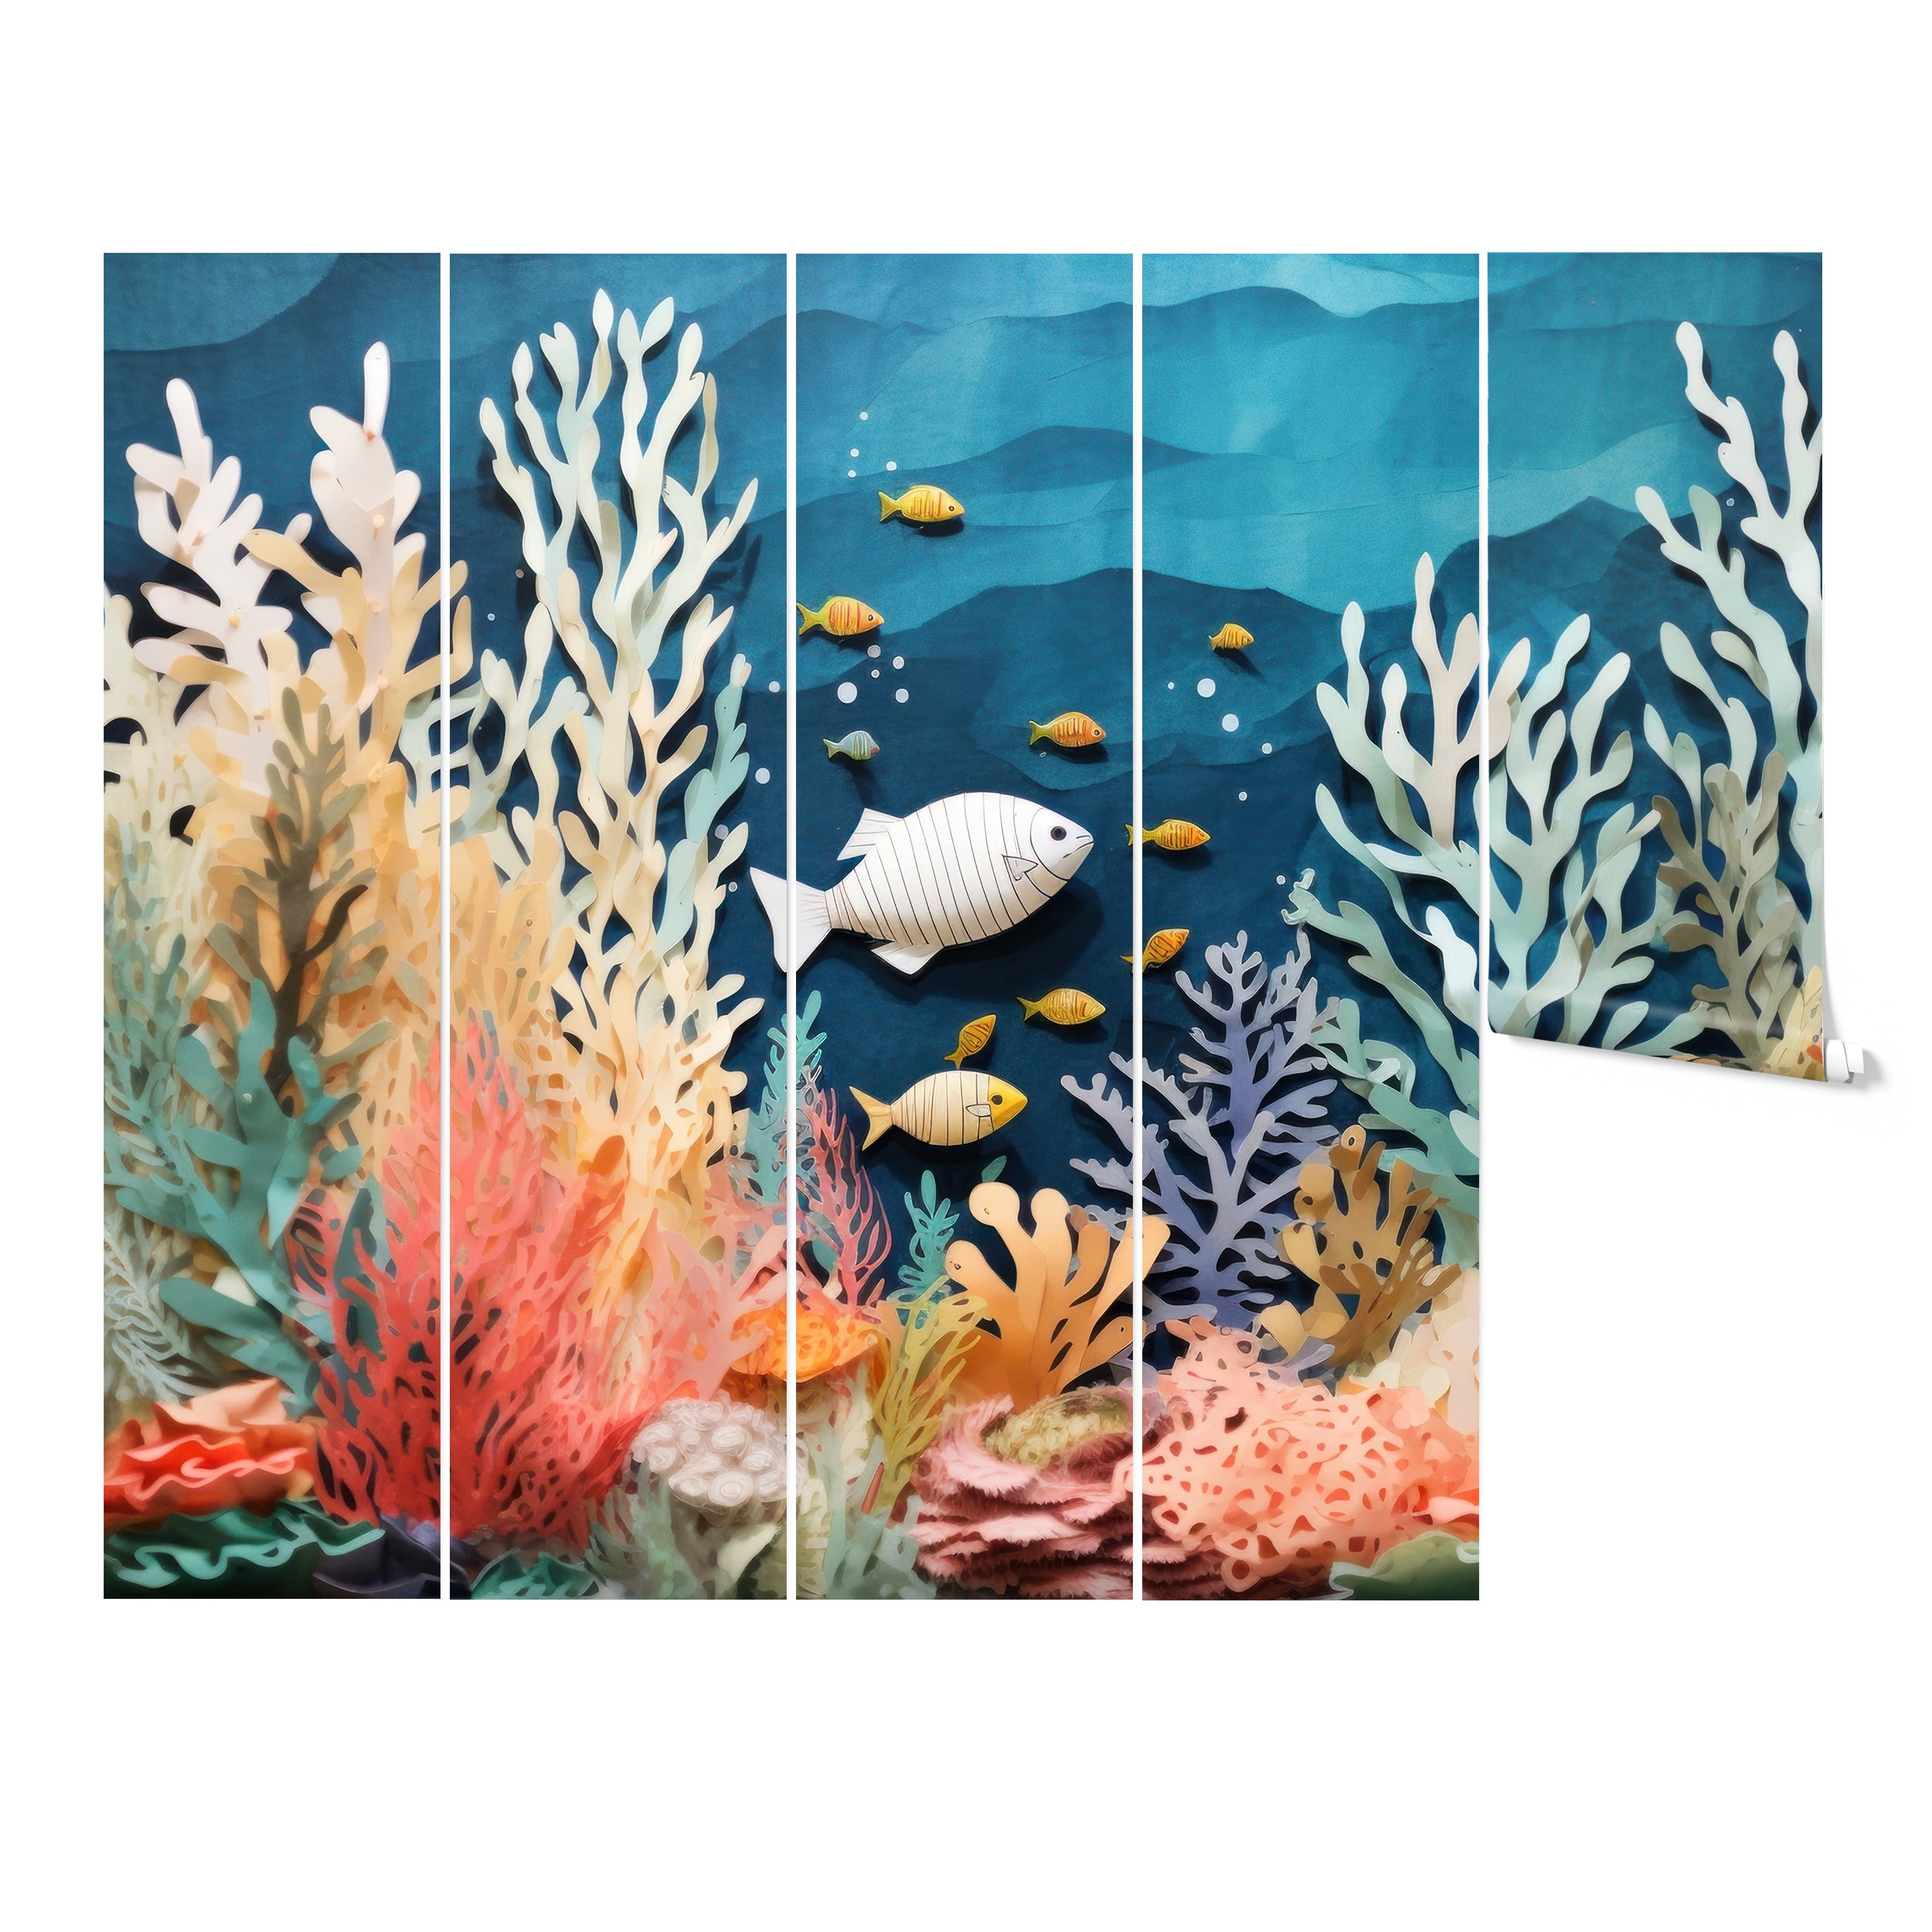 "Vibrant underwater scene wallpaper with detailed coral reef and marine life."